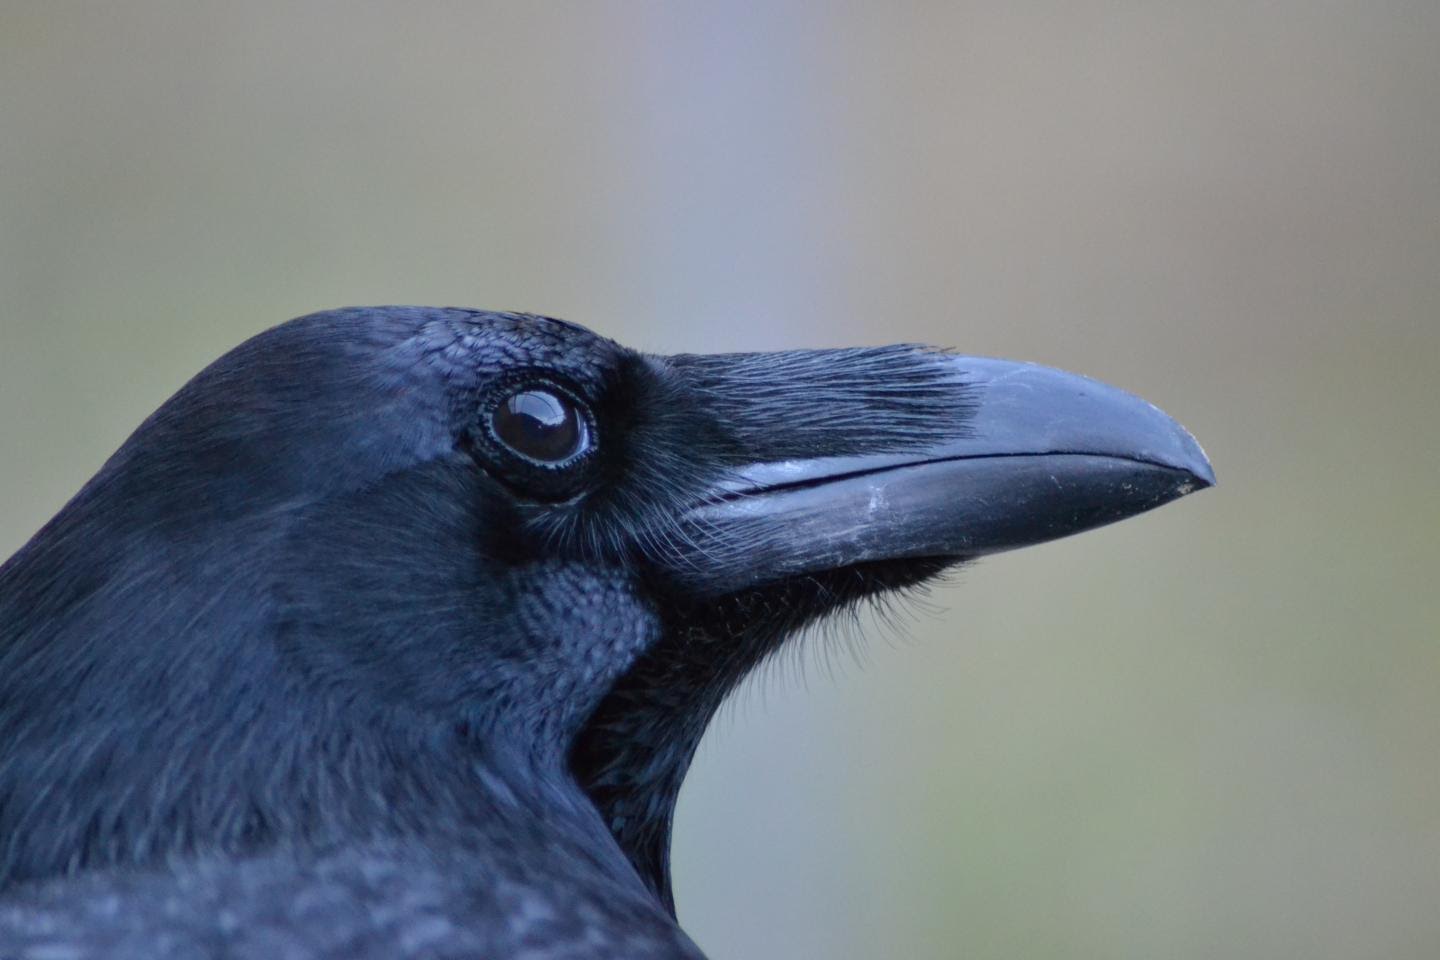 Researchers at the University of Vienna tested the ability of crows to empathise with others. Credit: Jana Müller, Universität Wien